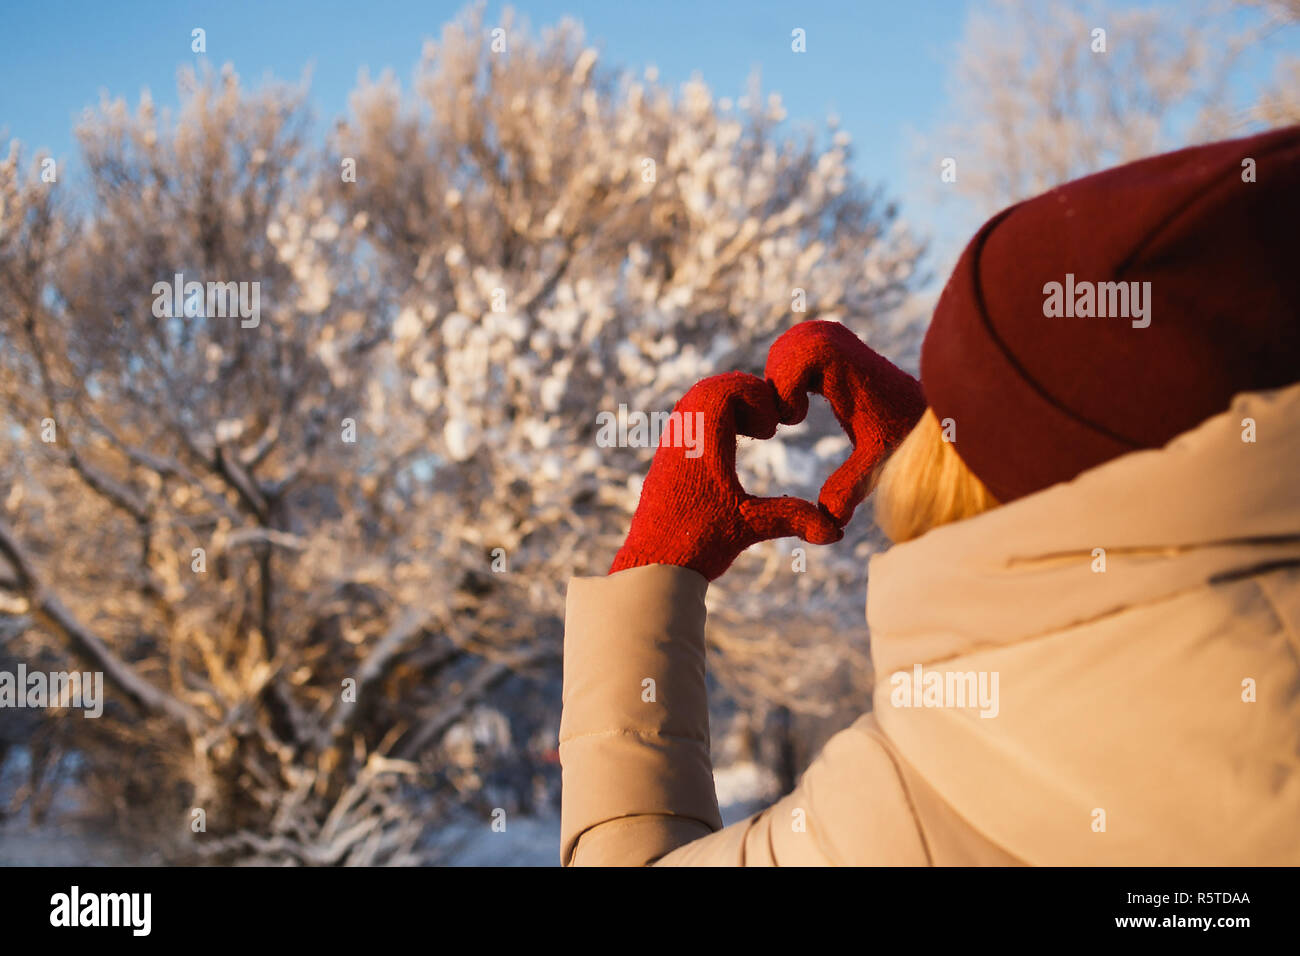 Heart shape symbol of the women mittens in winter frosty day with bushes covered snow on background. Concept of winter, good weather, lifestyle, dating and love. Stock Photo